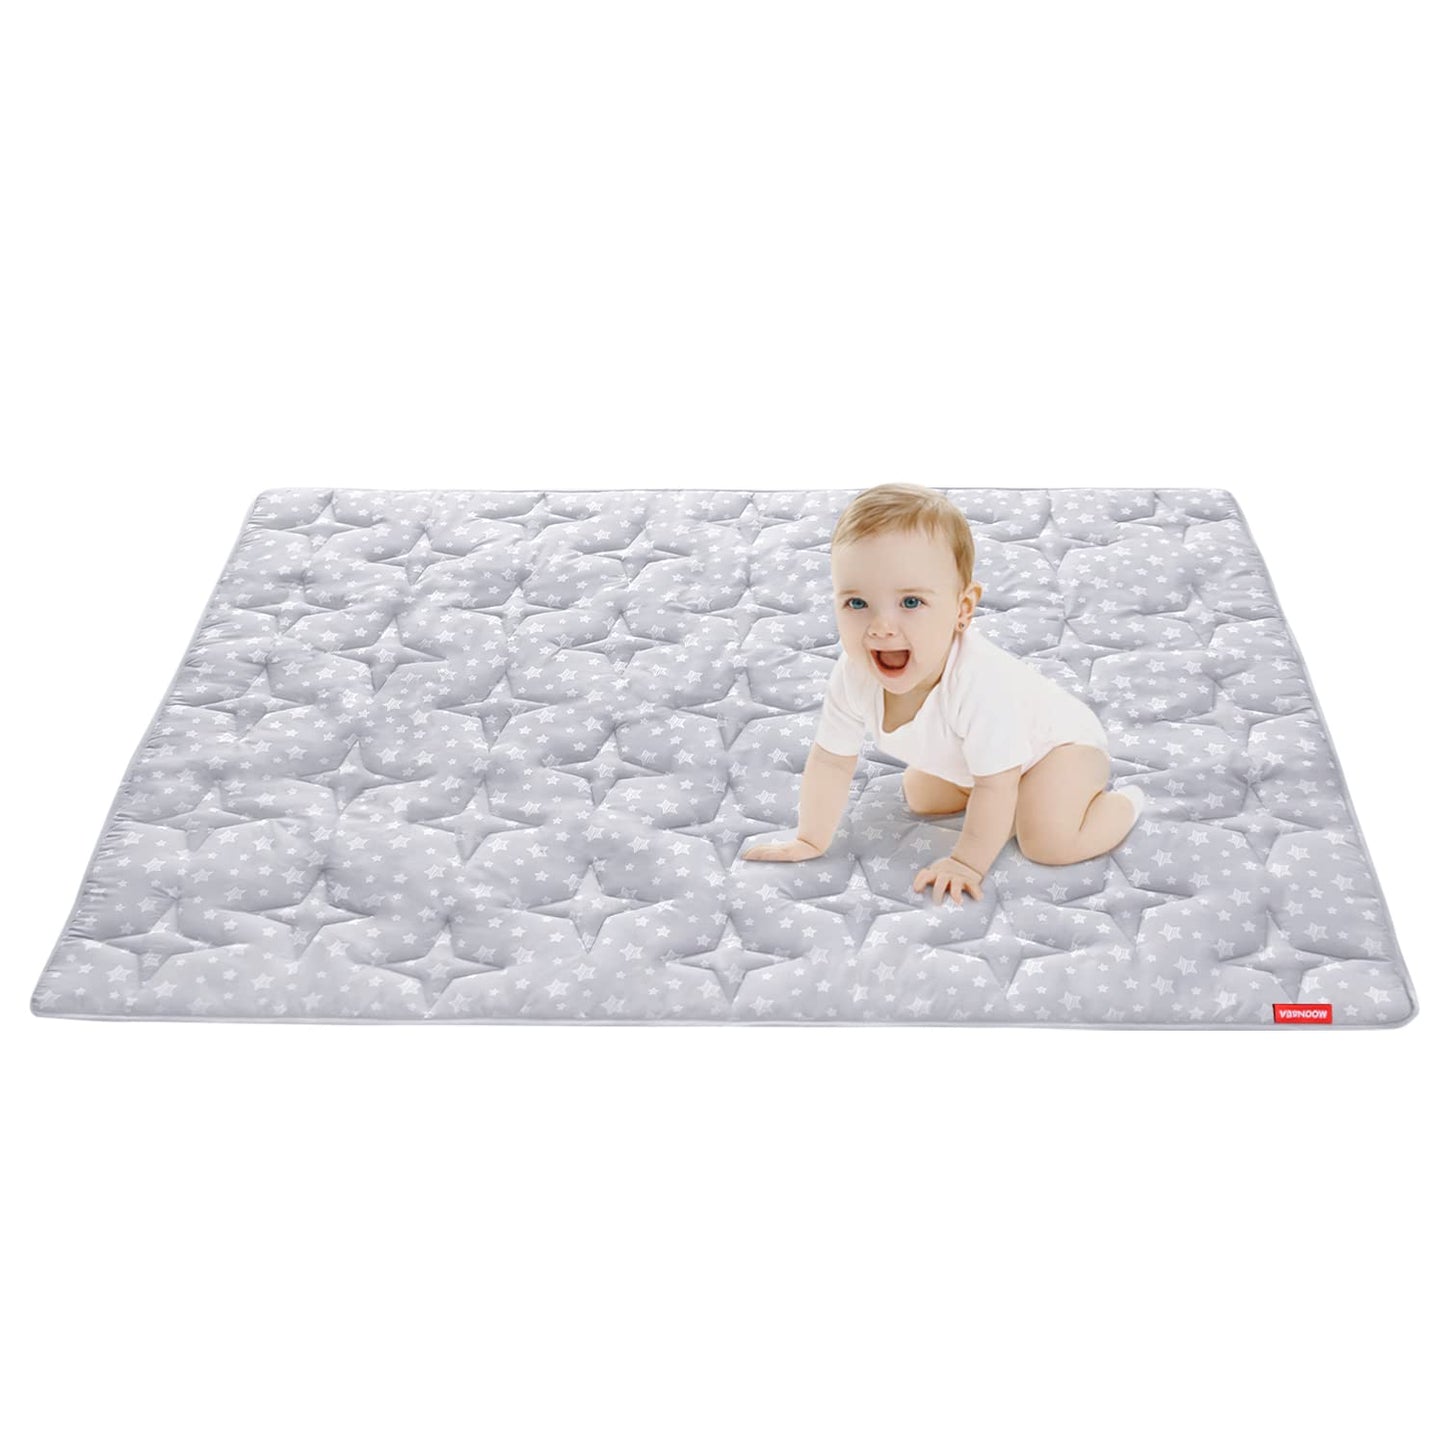 Baby Play Mat, Extra Large Thick Play Mat, Non Slip Cushioned Baby Play Mat  for Playing 79x63 Inches, One-Piece Baby Floor Mat for Babies, Toddlers